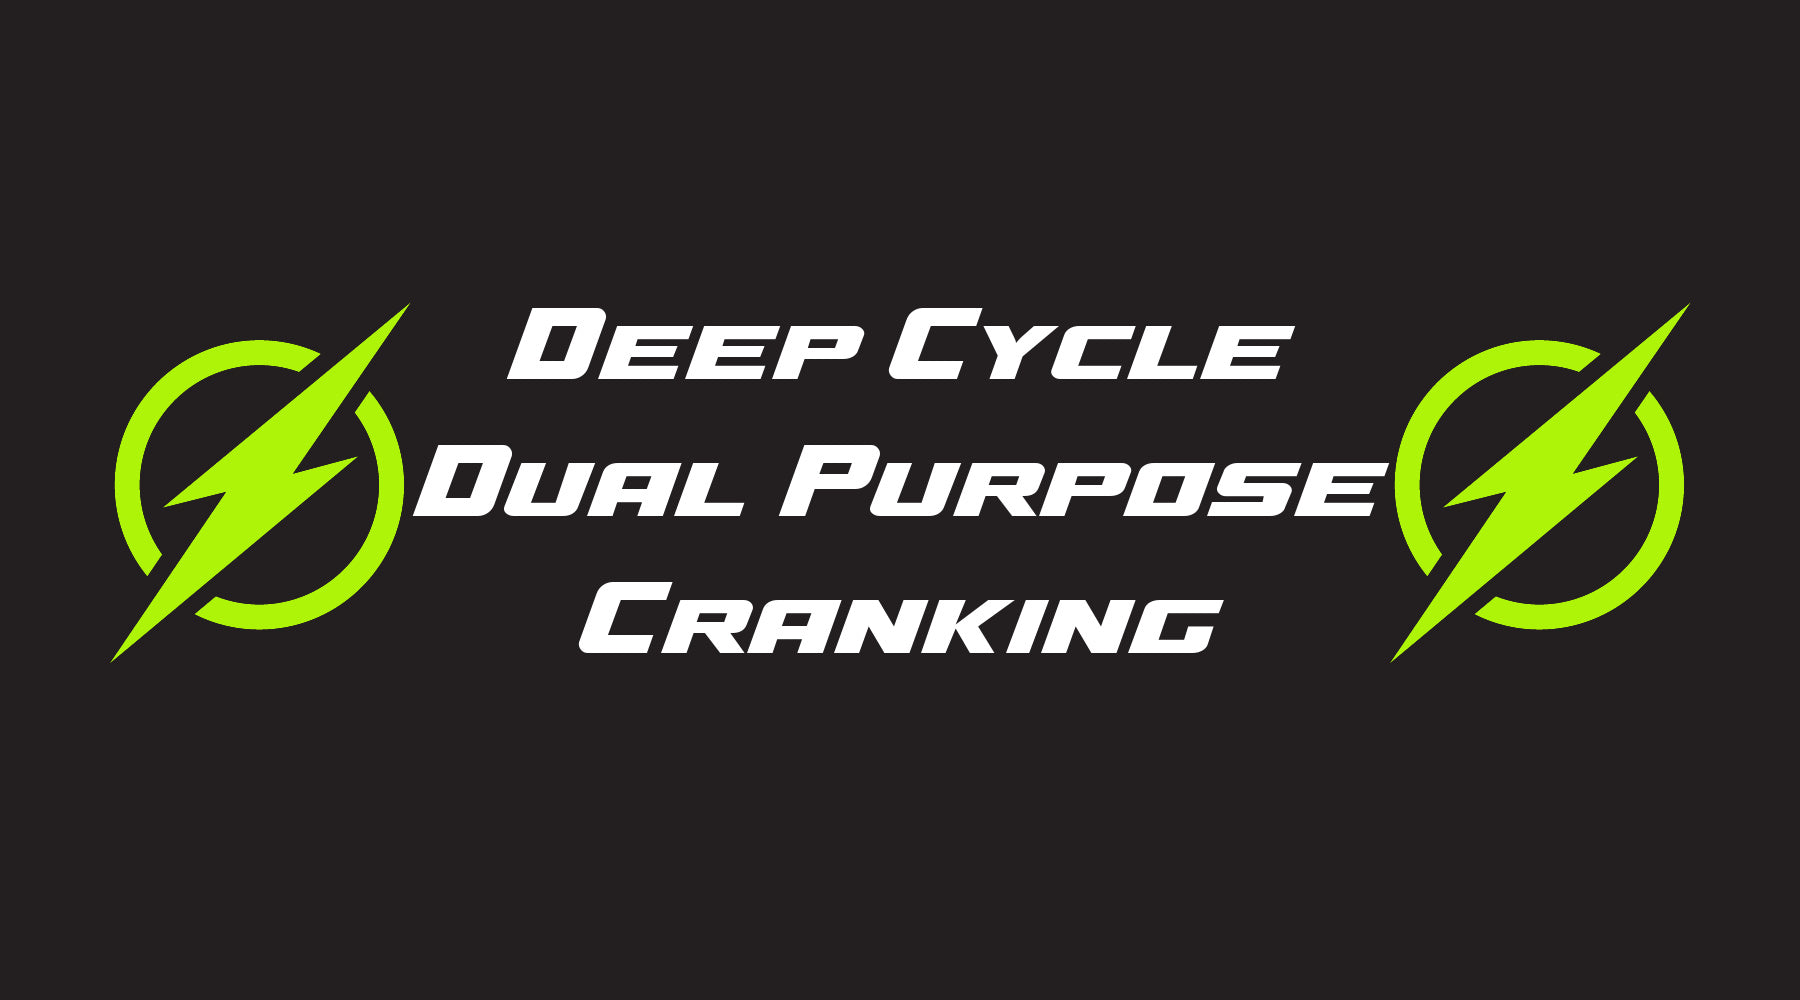 What is the difference between Deep Cycle, Dual Purpose, Cranking Batteries?